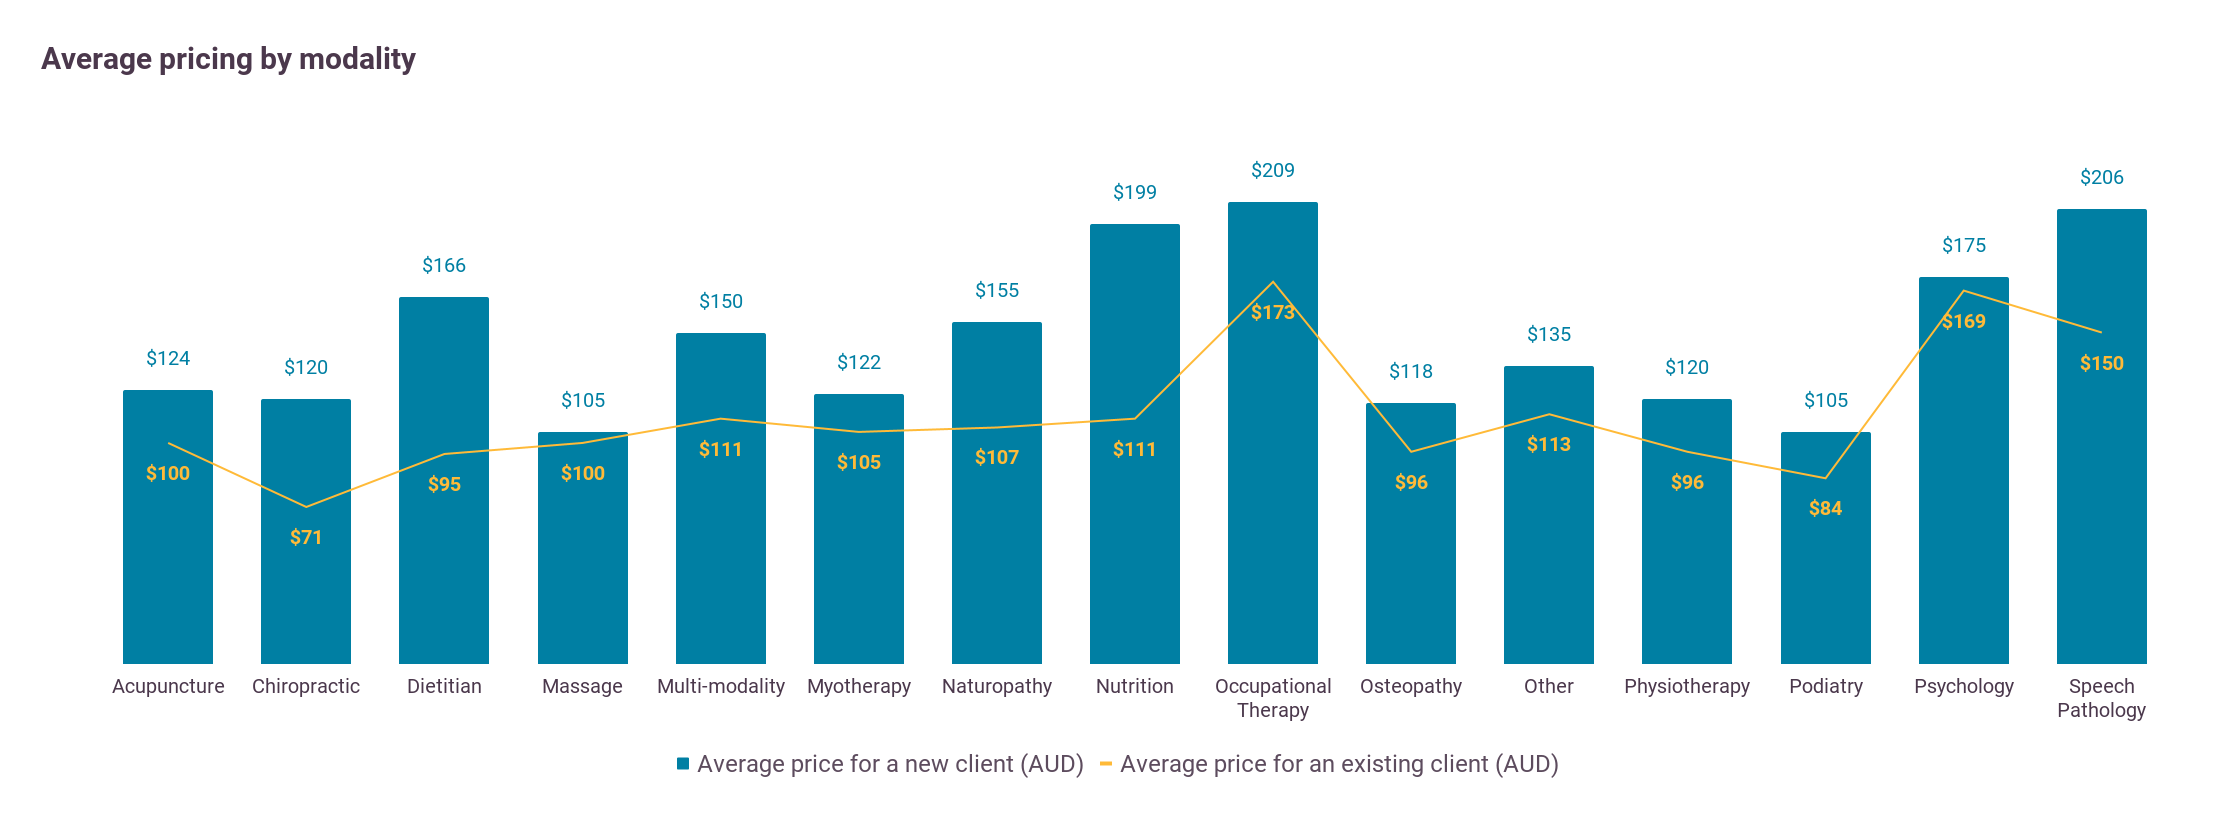 A combo chart showing the average price charged for new and existing clients by allied health modality